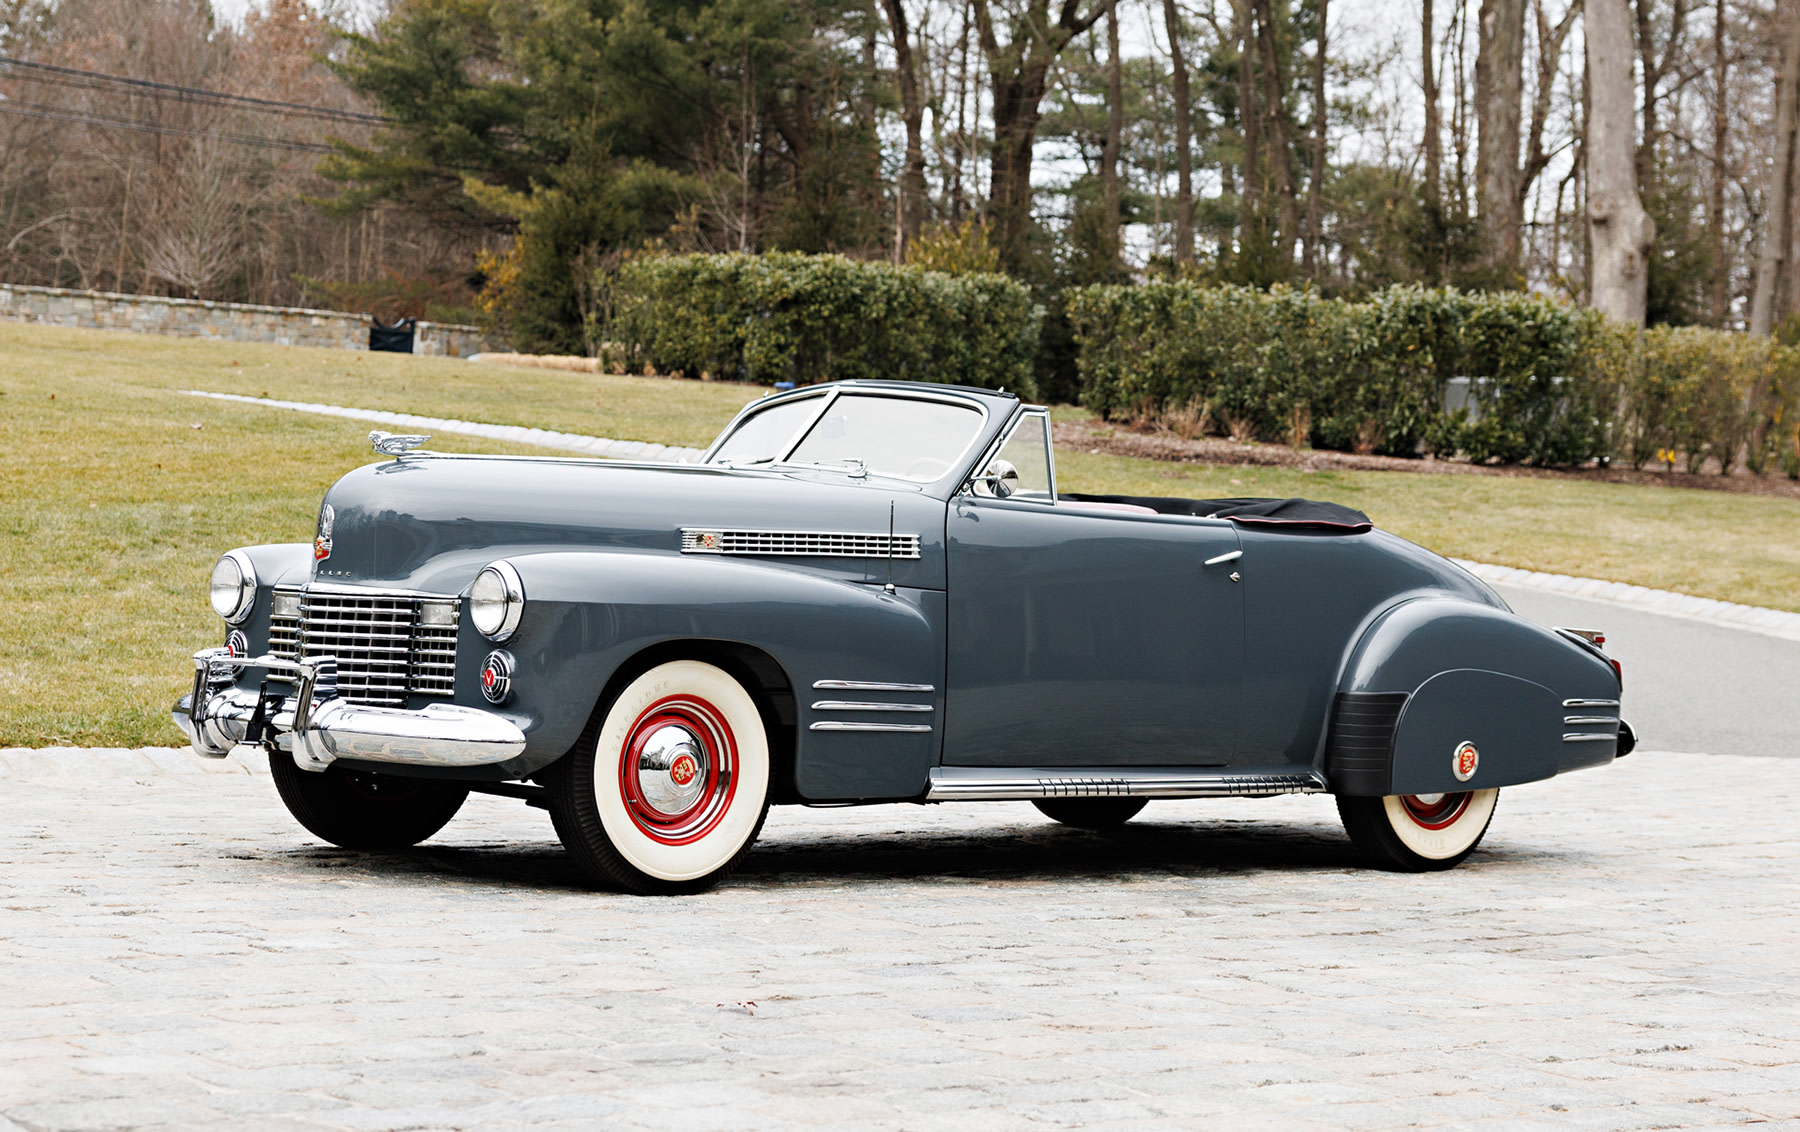 1941 Cadillac Series 62 Convertible Coupe (FL24)